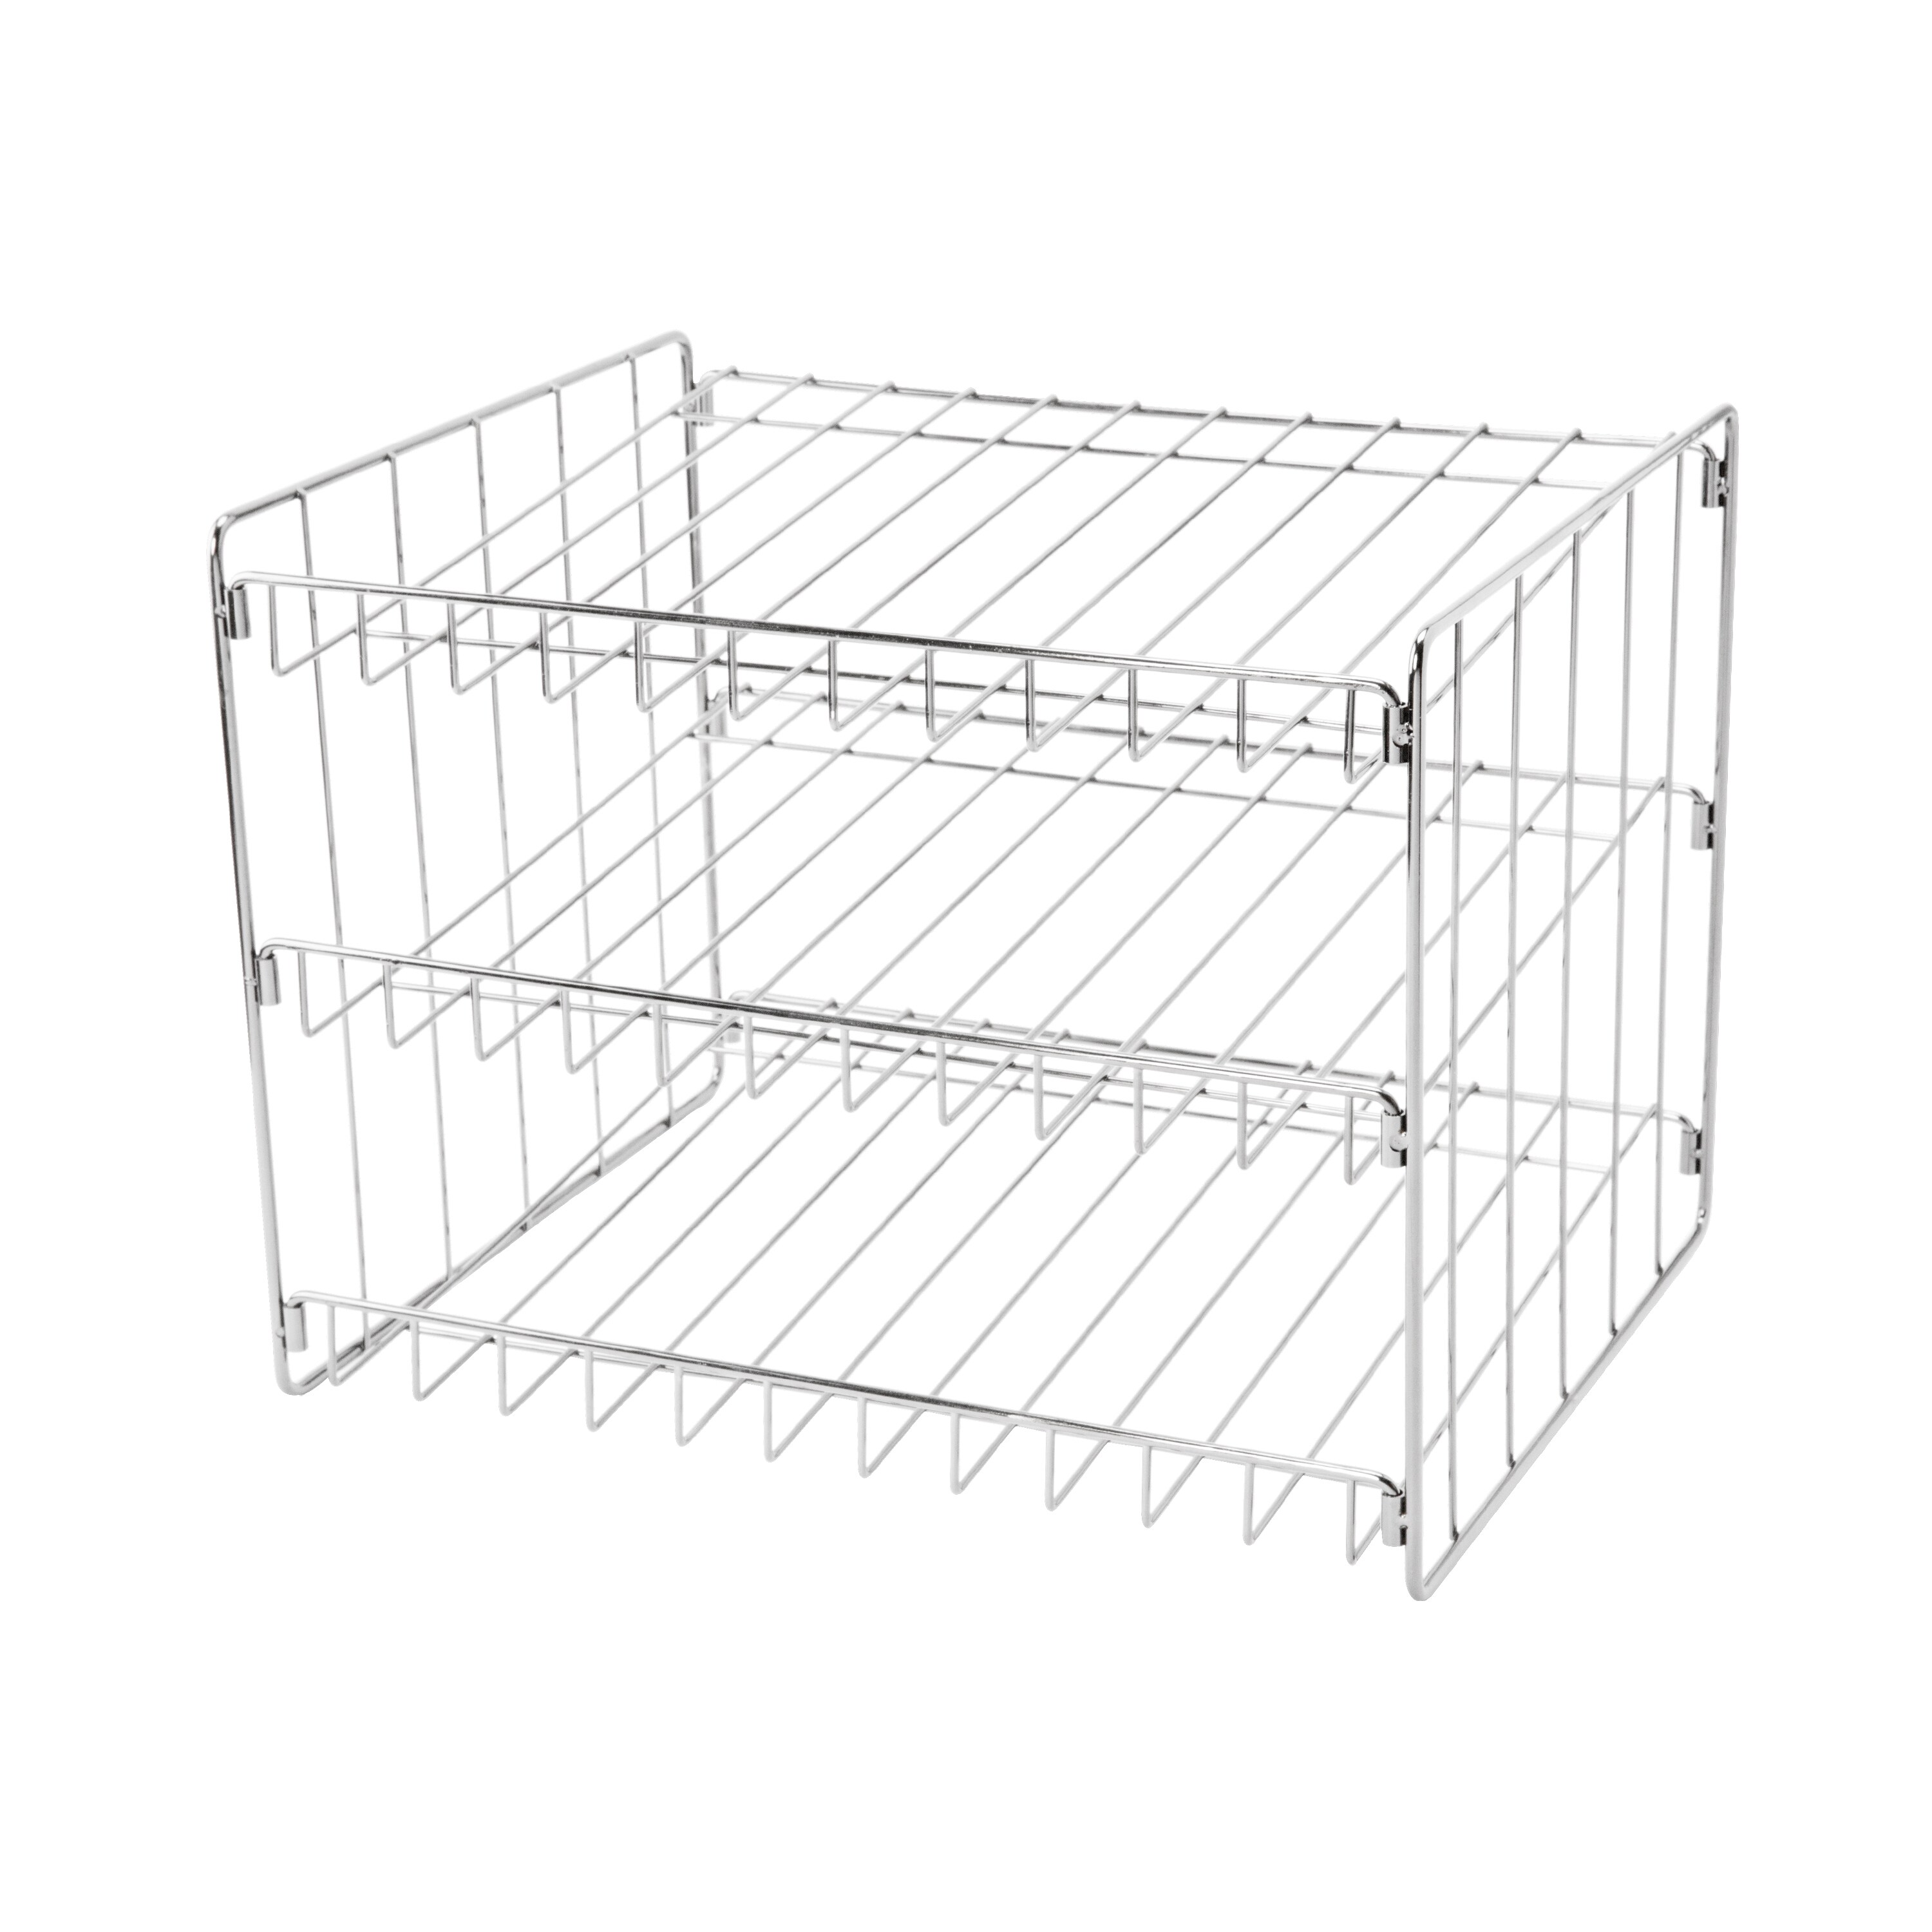 Details about   2 Stackable Can Rack Organizer Kitchen Cabinet Shelf Holds up to 72 Cans 3-Tier 